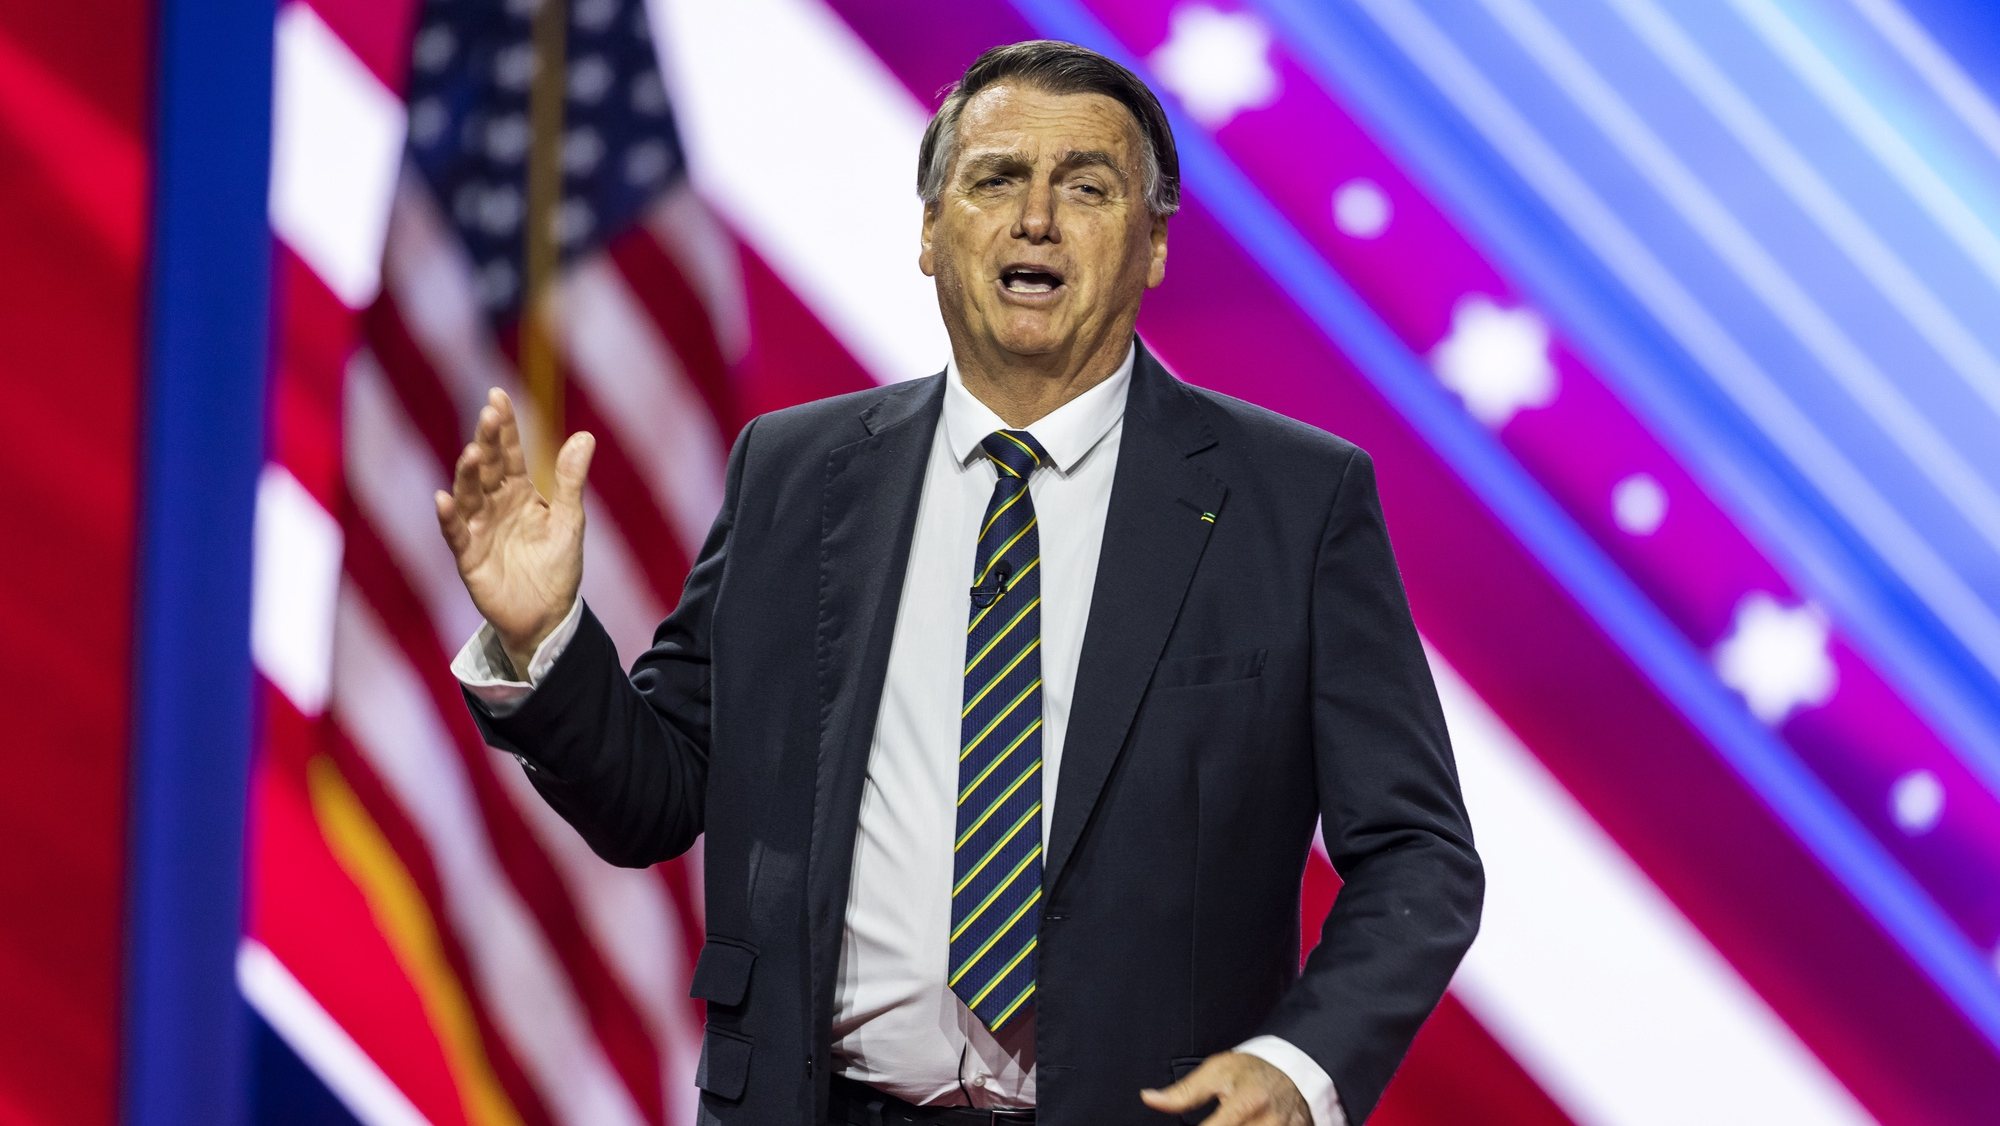 epa10503481 Former President of Brazil Jair Bolsonaro speaks at the Conservative Political Action Conference (CPAC), billed as the largest conservative gathering in the world, at the Gaylord National Resort &amp; Convention Center in National Harbor, Maryland, USA, 04 March 2023. Though this year’s speakers include former US President Donald Trump and former Brazilian President Jair Bolsonaro, many other conservatives are skipping the conference after a male campaign aid accused CPAC Chair Matt Schlapp of sexual assault.  EPA/JIM LO SCALZO